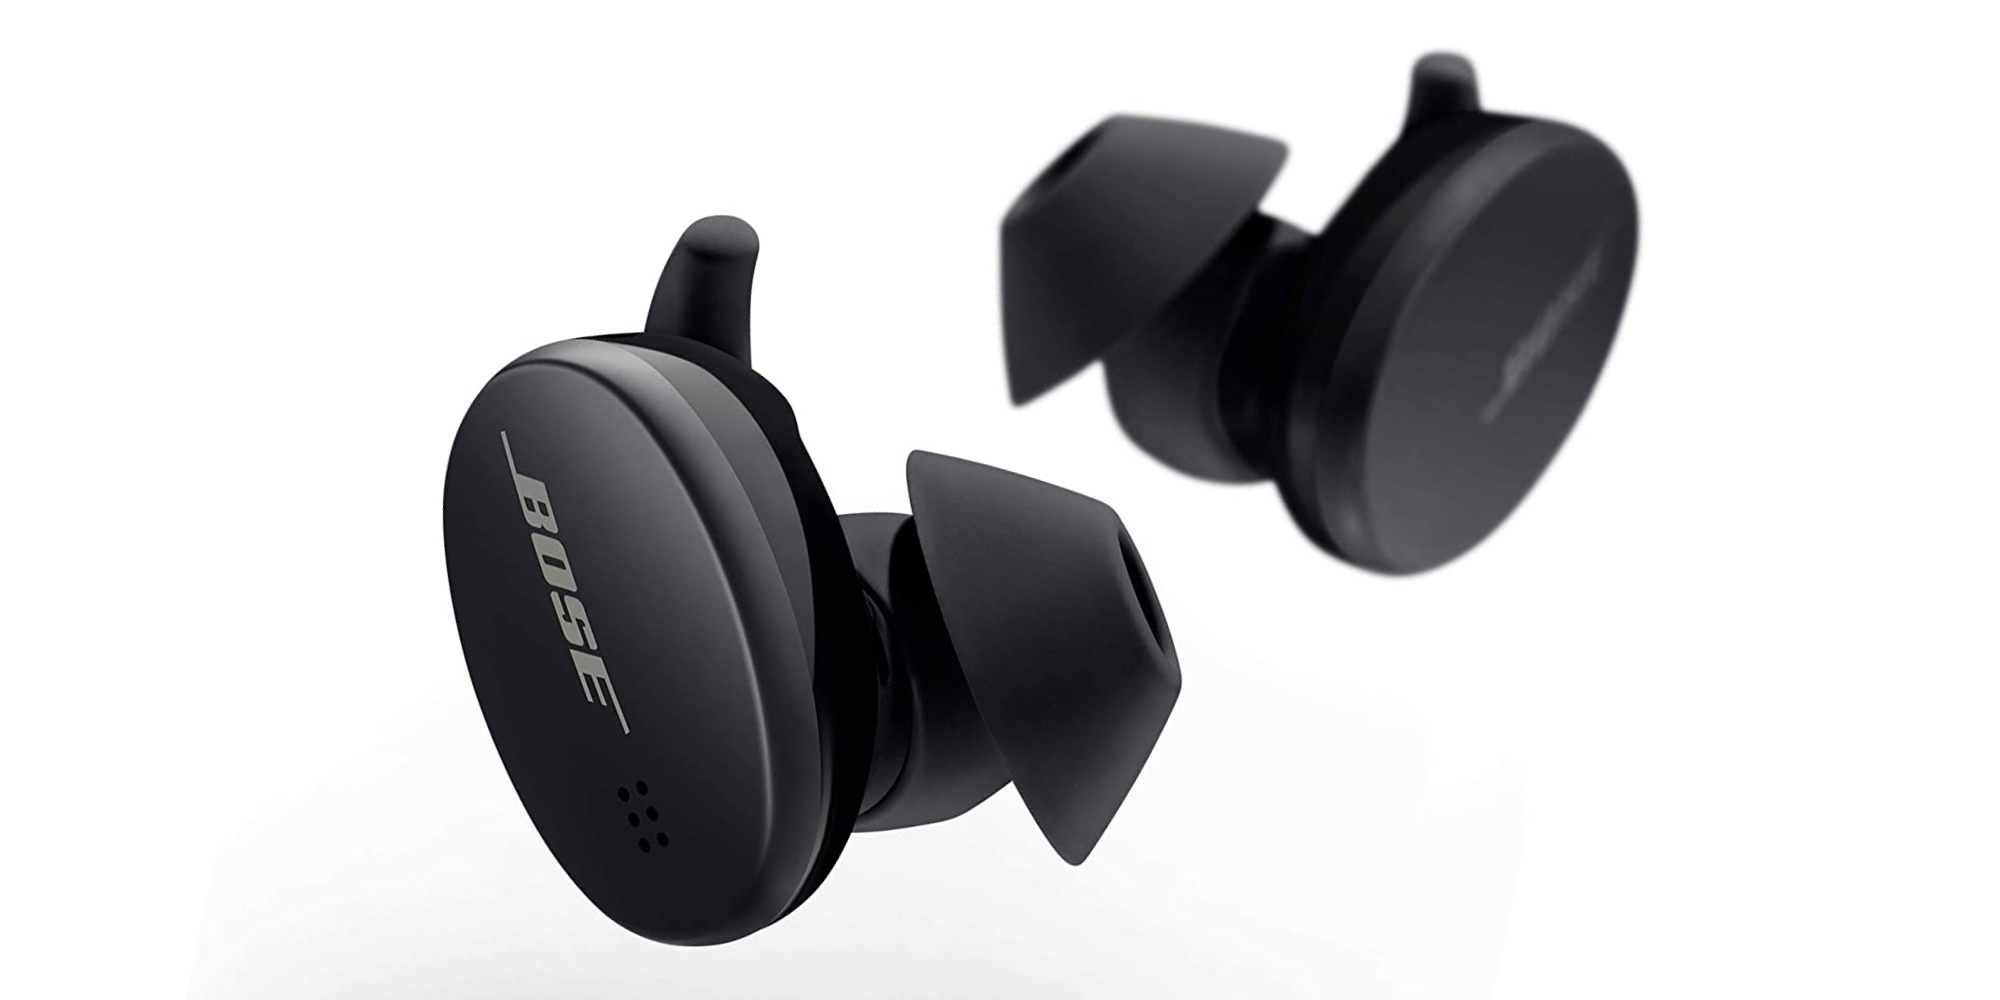 Bose Black Friday sale now live: Earbuds, headphones, more - 9to5Toys